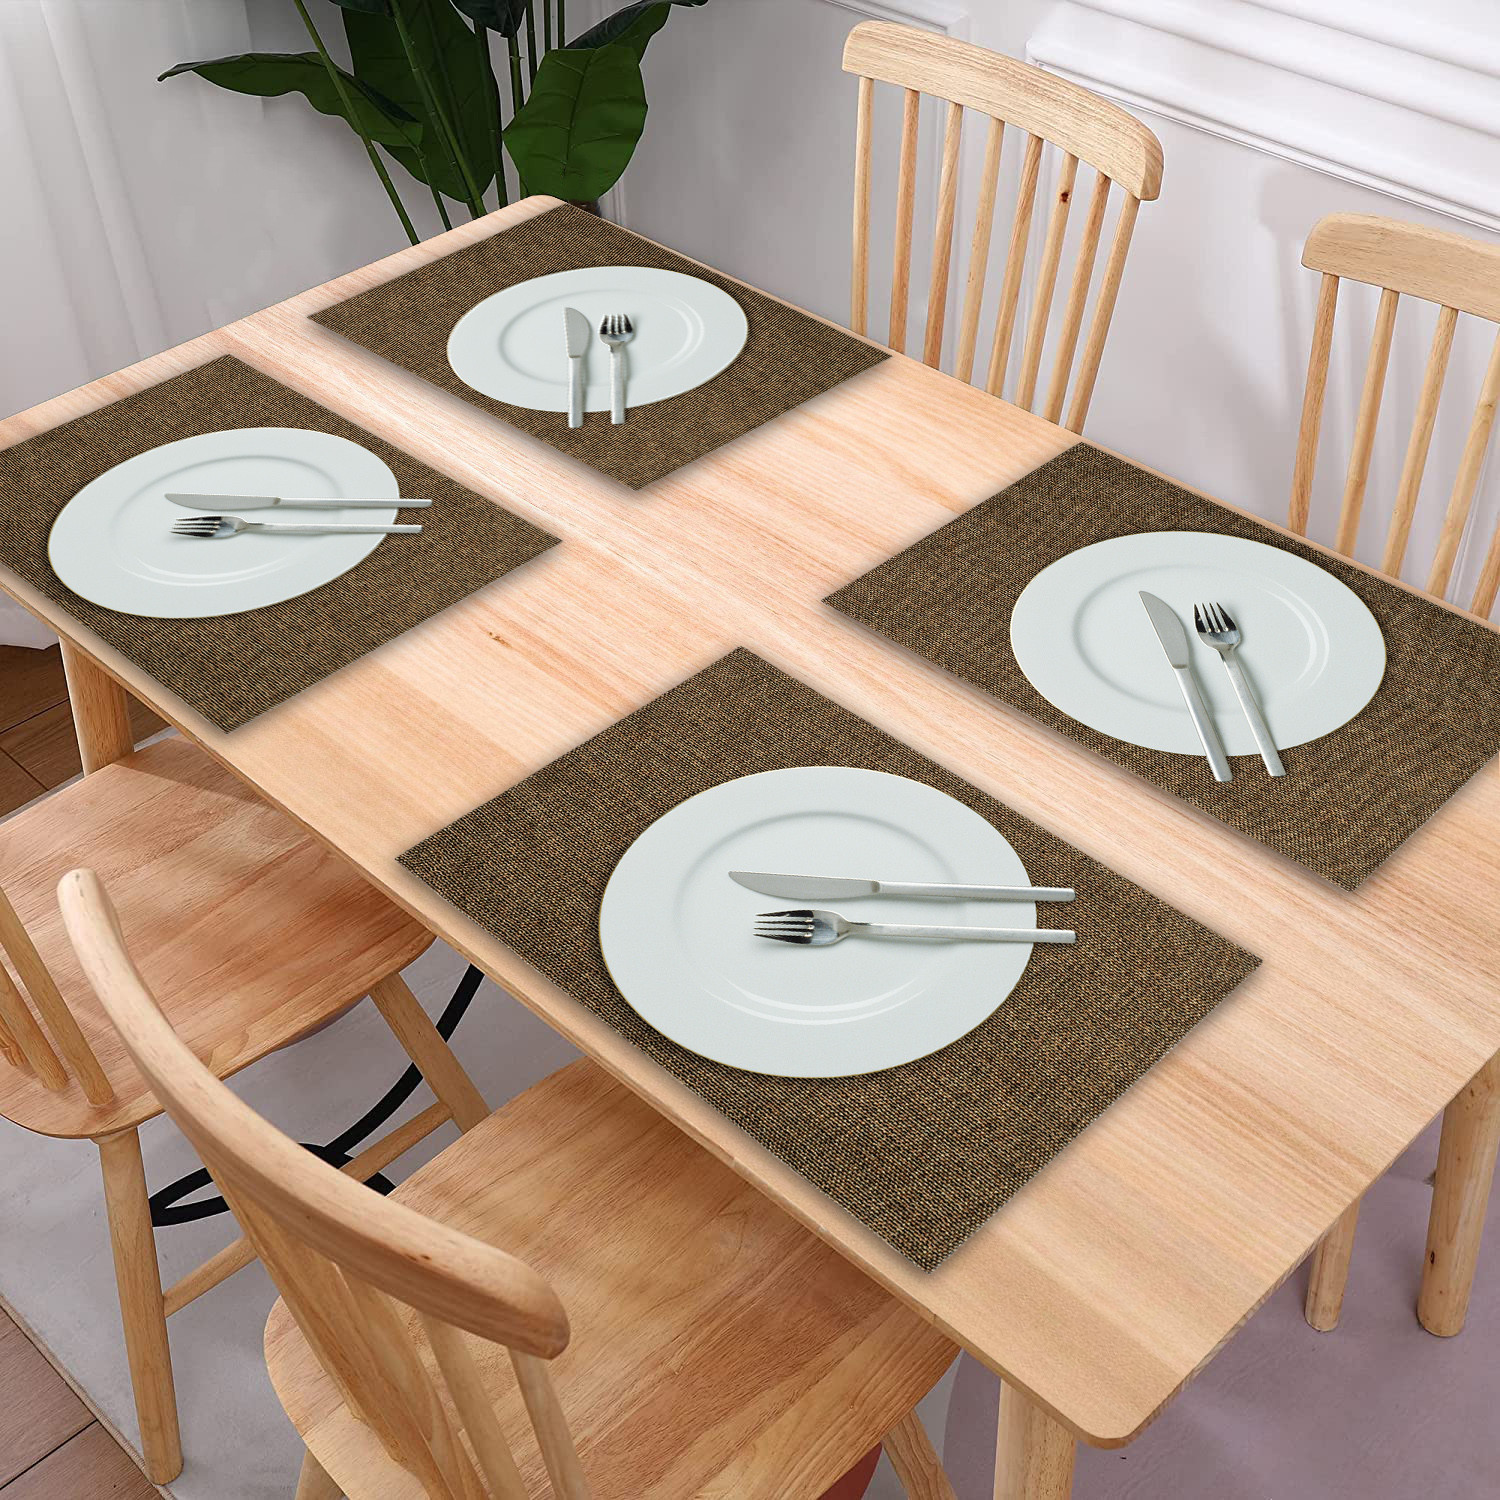 Kuber Industries Jute Table Placemat for Home, Hotels, Set of 6 (Brown)